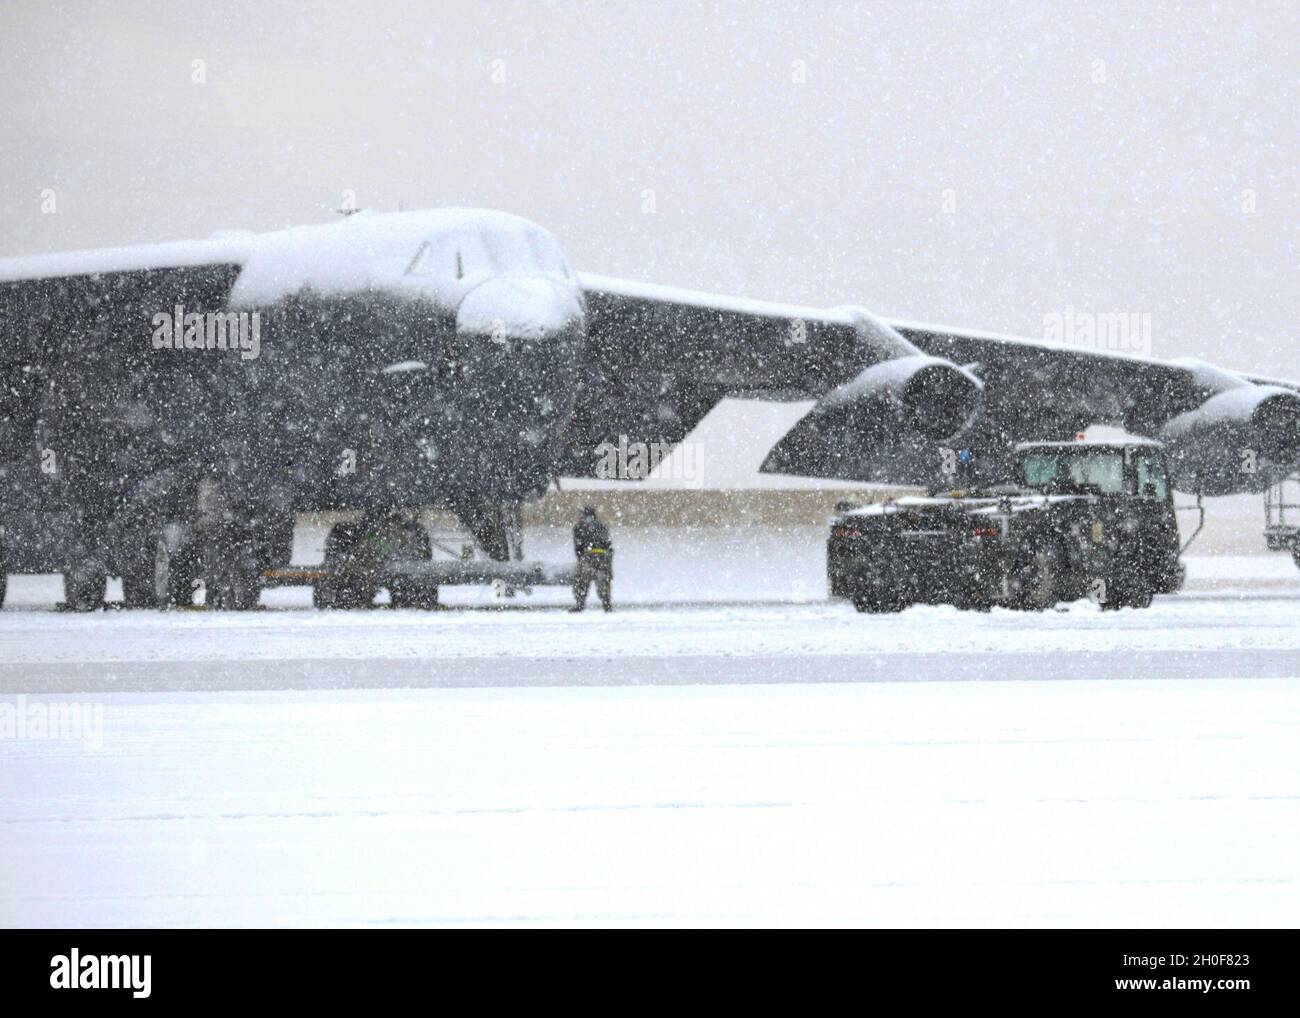 A B-52H Stratofortress idles as Airmen get ready to fly at Minot Air Force  Base, North Dakota, Feb. 24, 2021. The bomber is capable of flying at high  subsonic speeds at altitudes